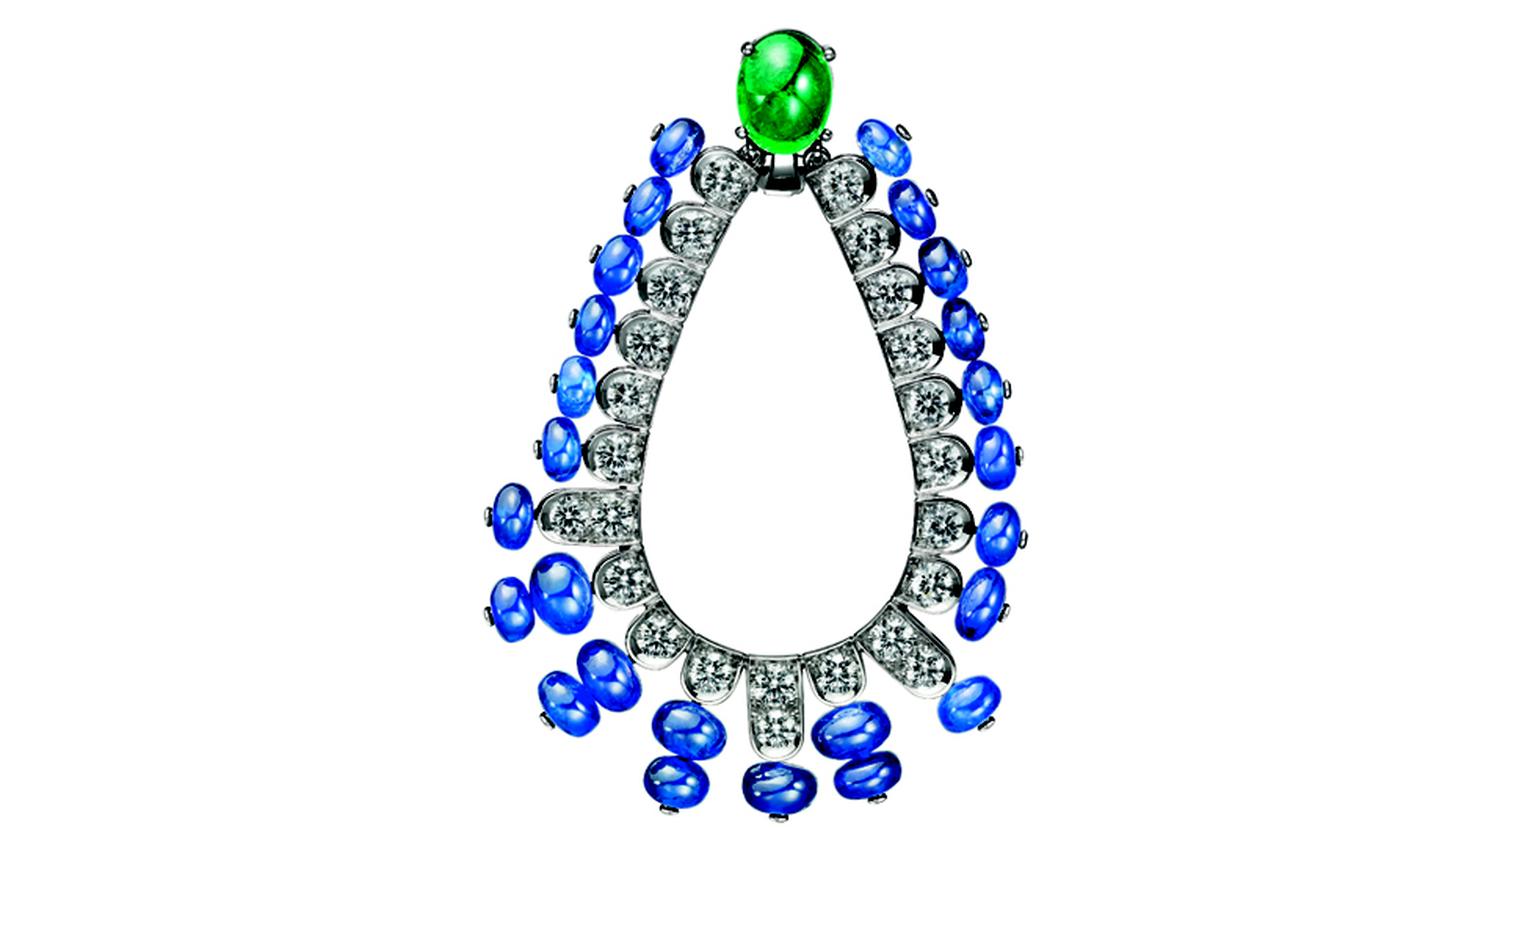 BOUCHERON. Beau Rivage earrings, set with an oval cabachon emerald and sapphire beads, paved with diamonds, white gold. POA